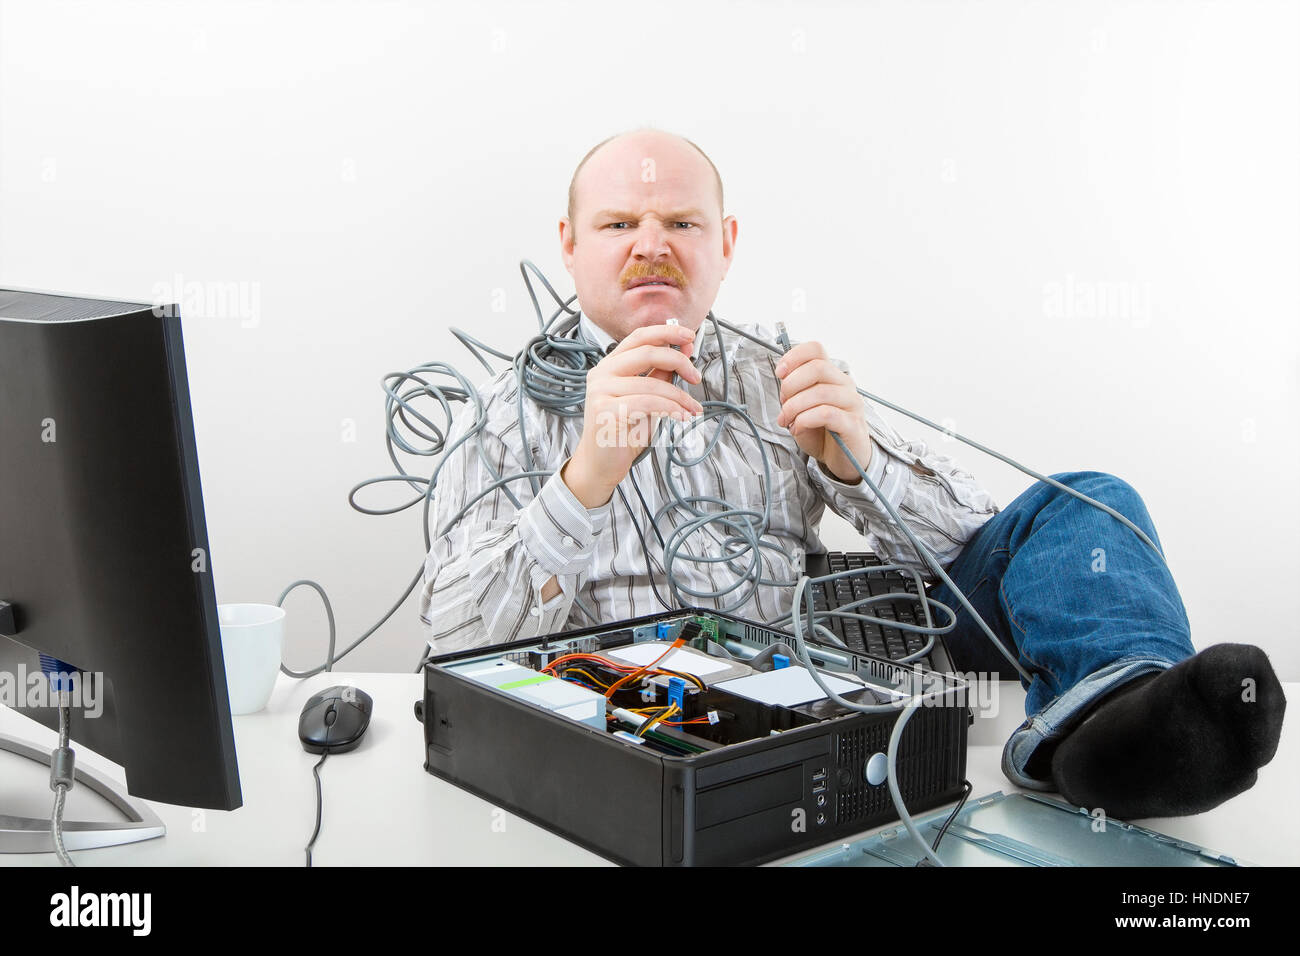 Furious Businessman Holding Tangled Cables Of Computer At Desk Stock Photo